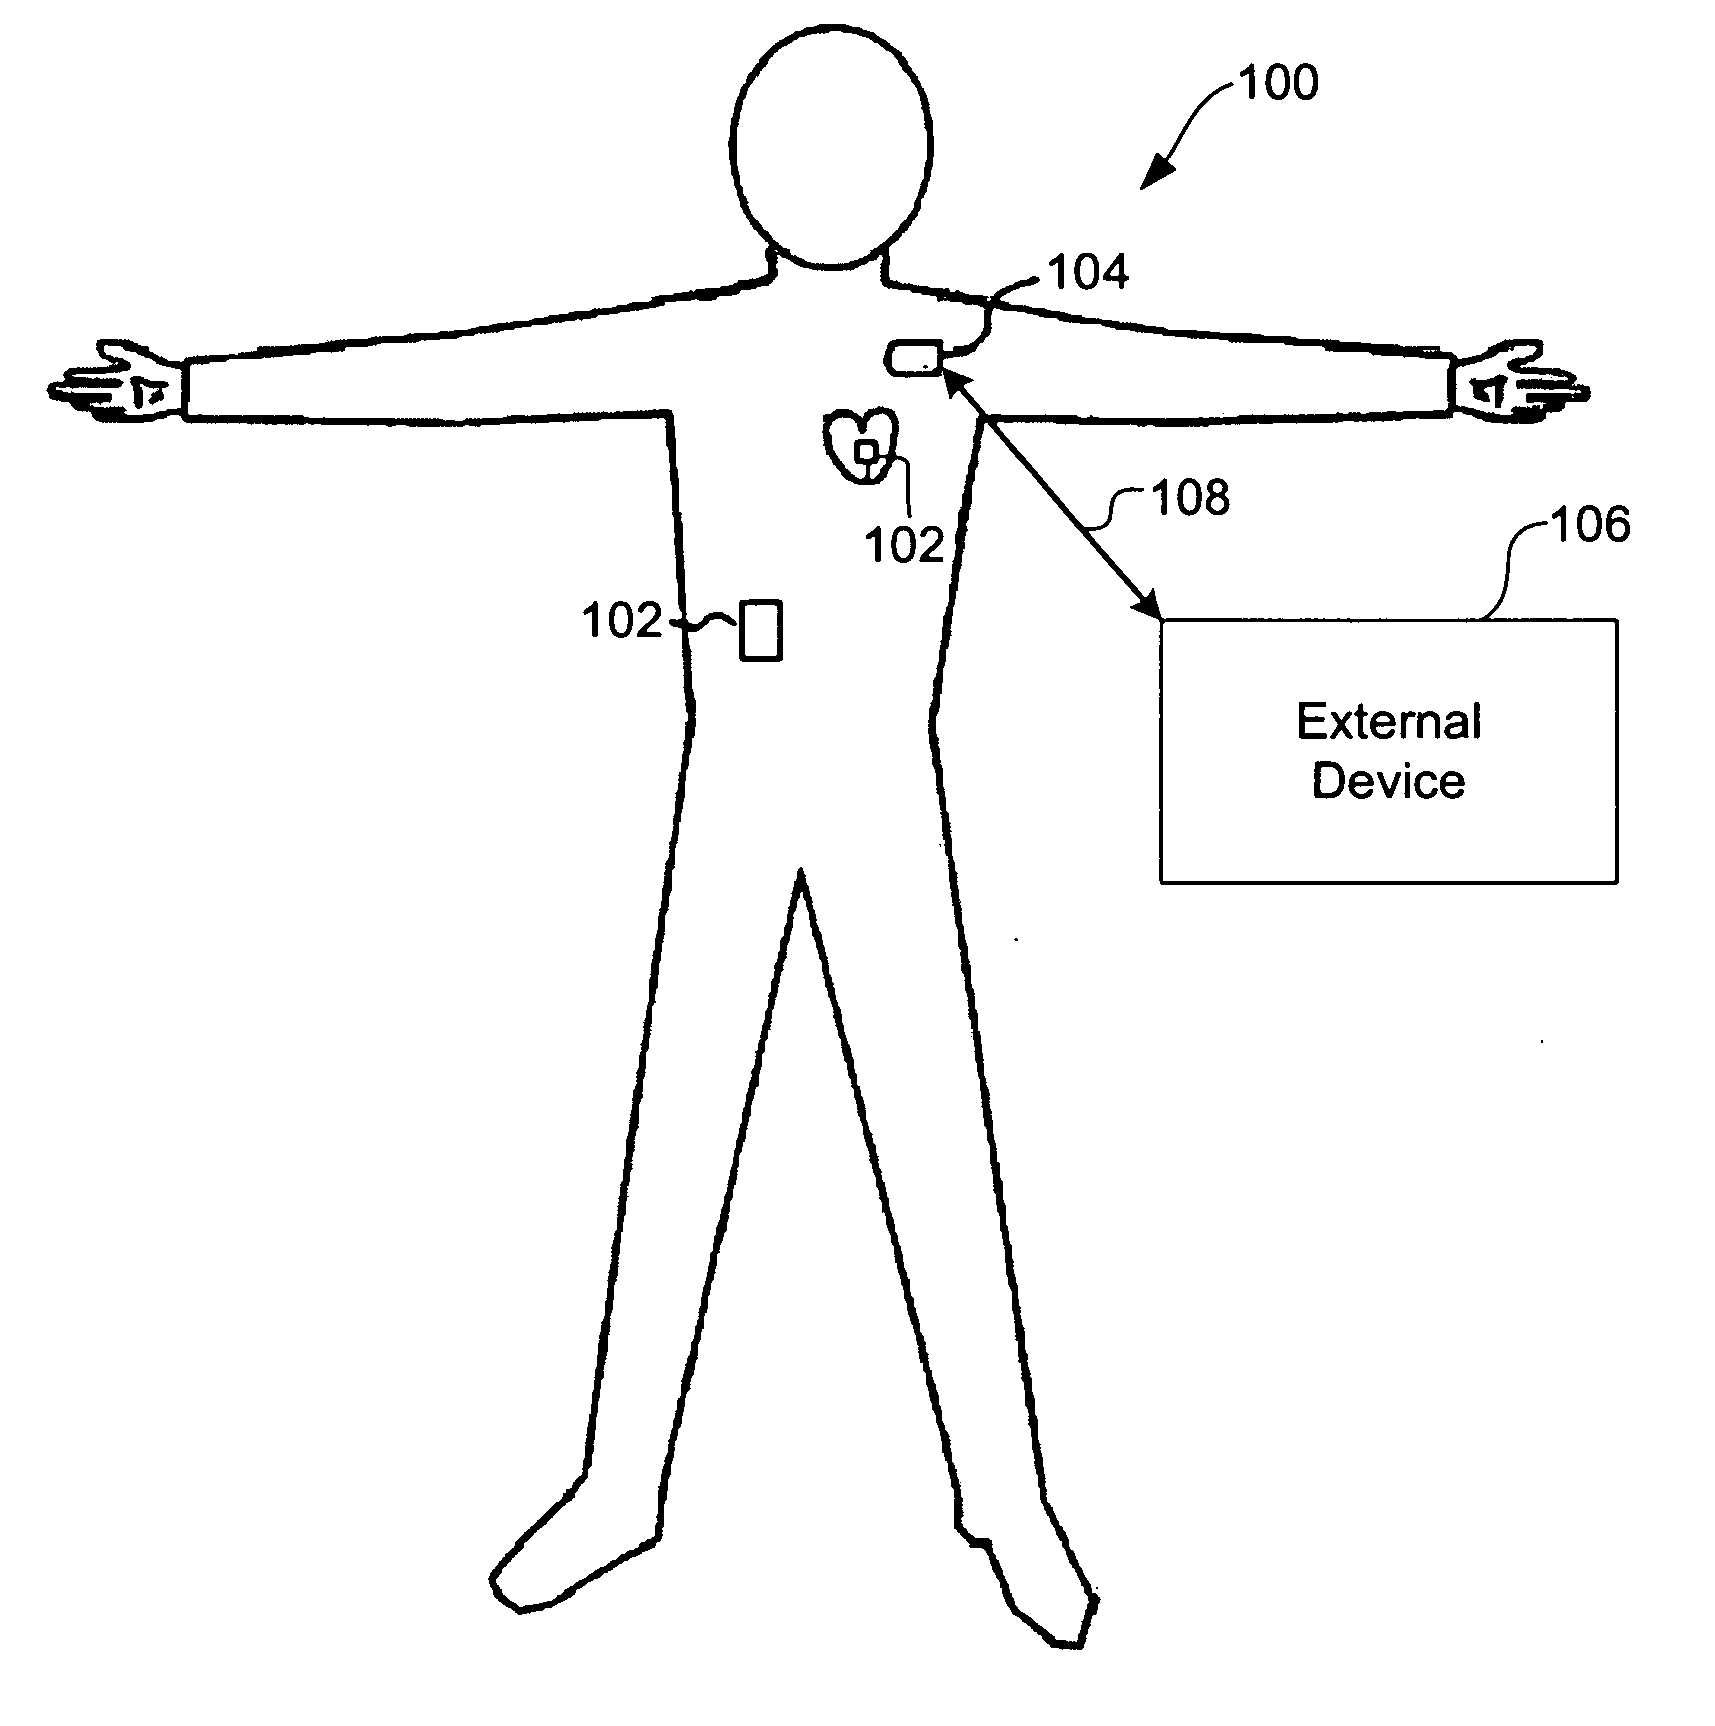 Systems and methods for timing-based communication between implantable medical devices